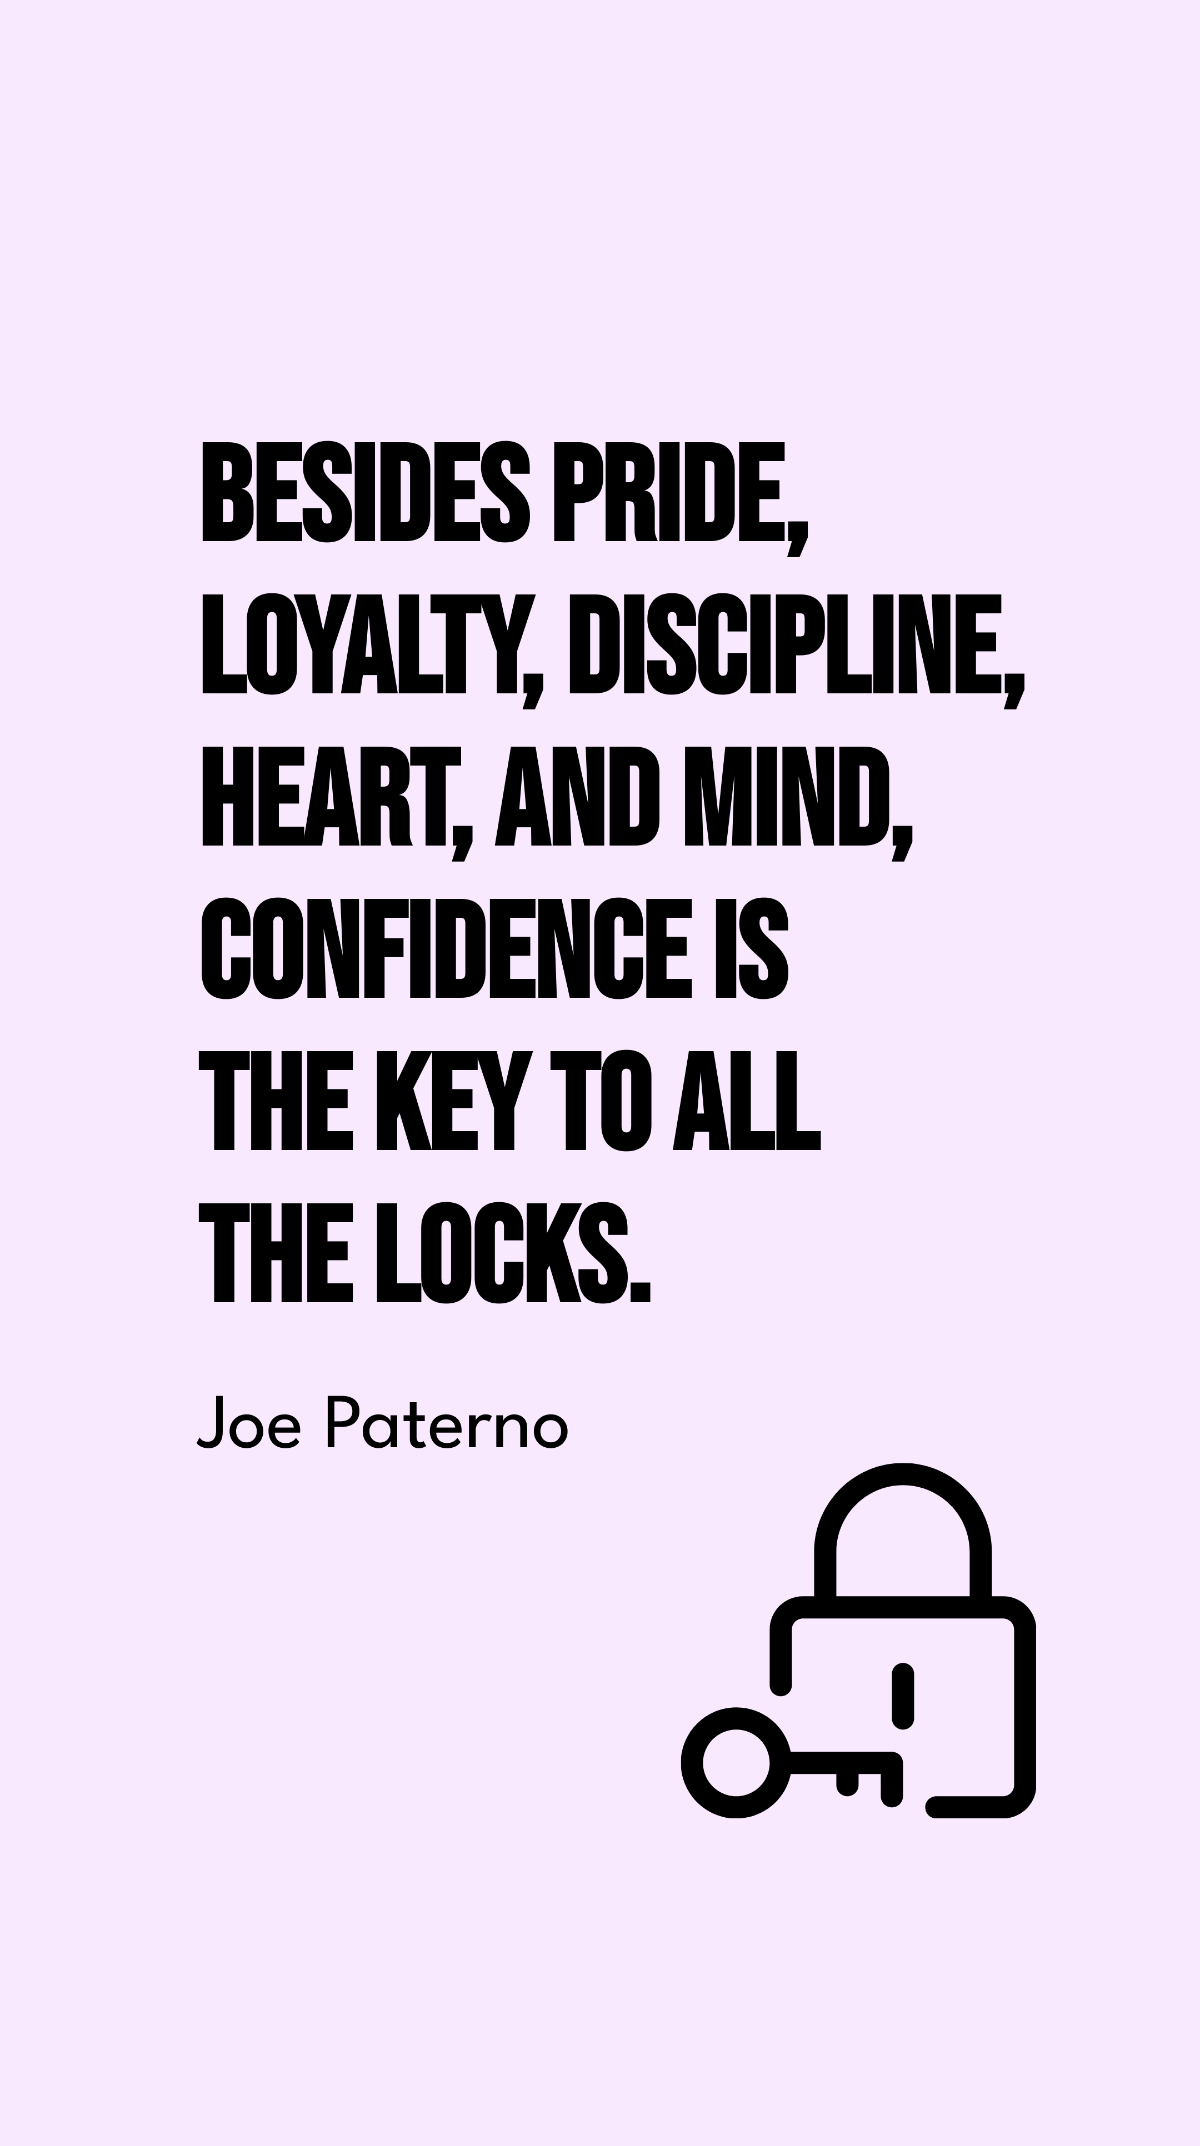 Joe Paterno - Besides pride, loyalty, discipline, heart, and mind, confidence is the key to all the locks. Template